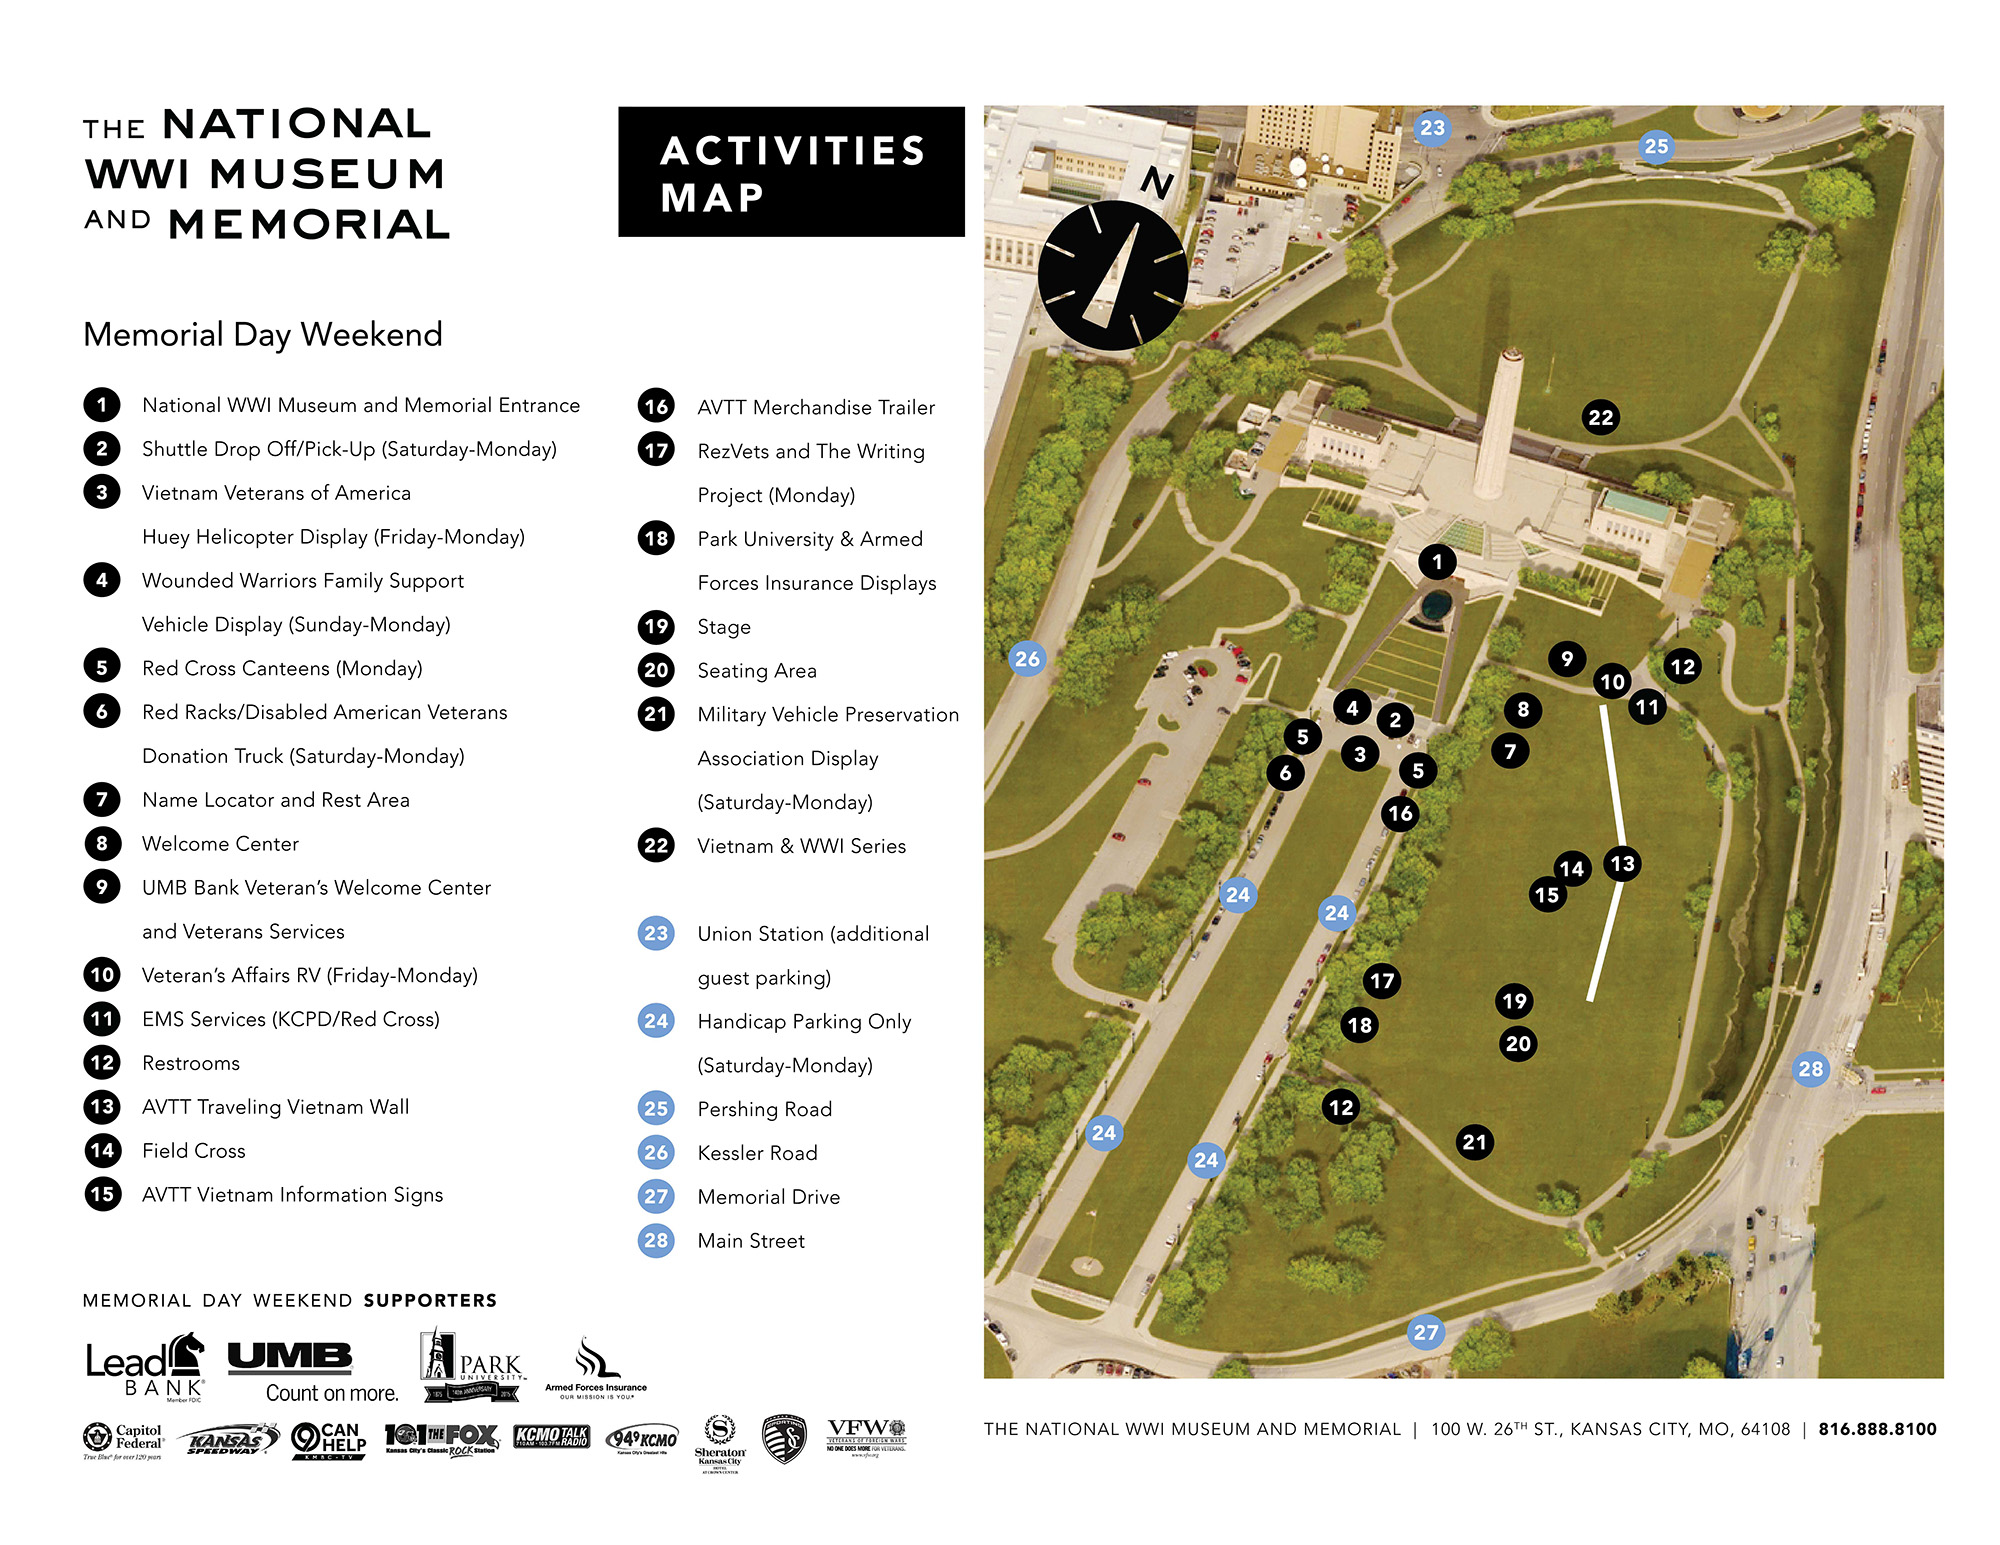 Map of the Museum and Memorial grounds, labeled with numbers corresponding to the weekend events.